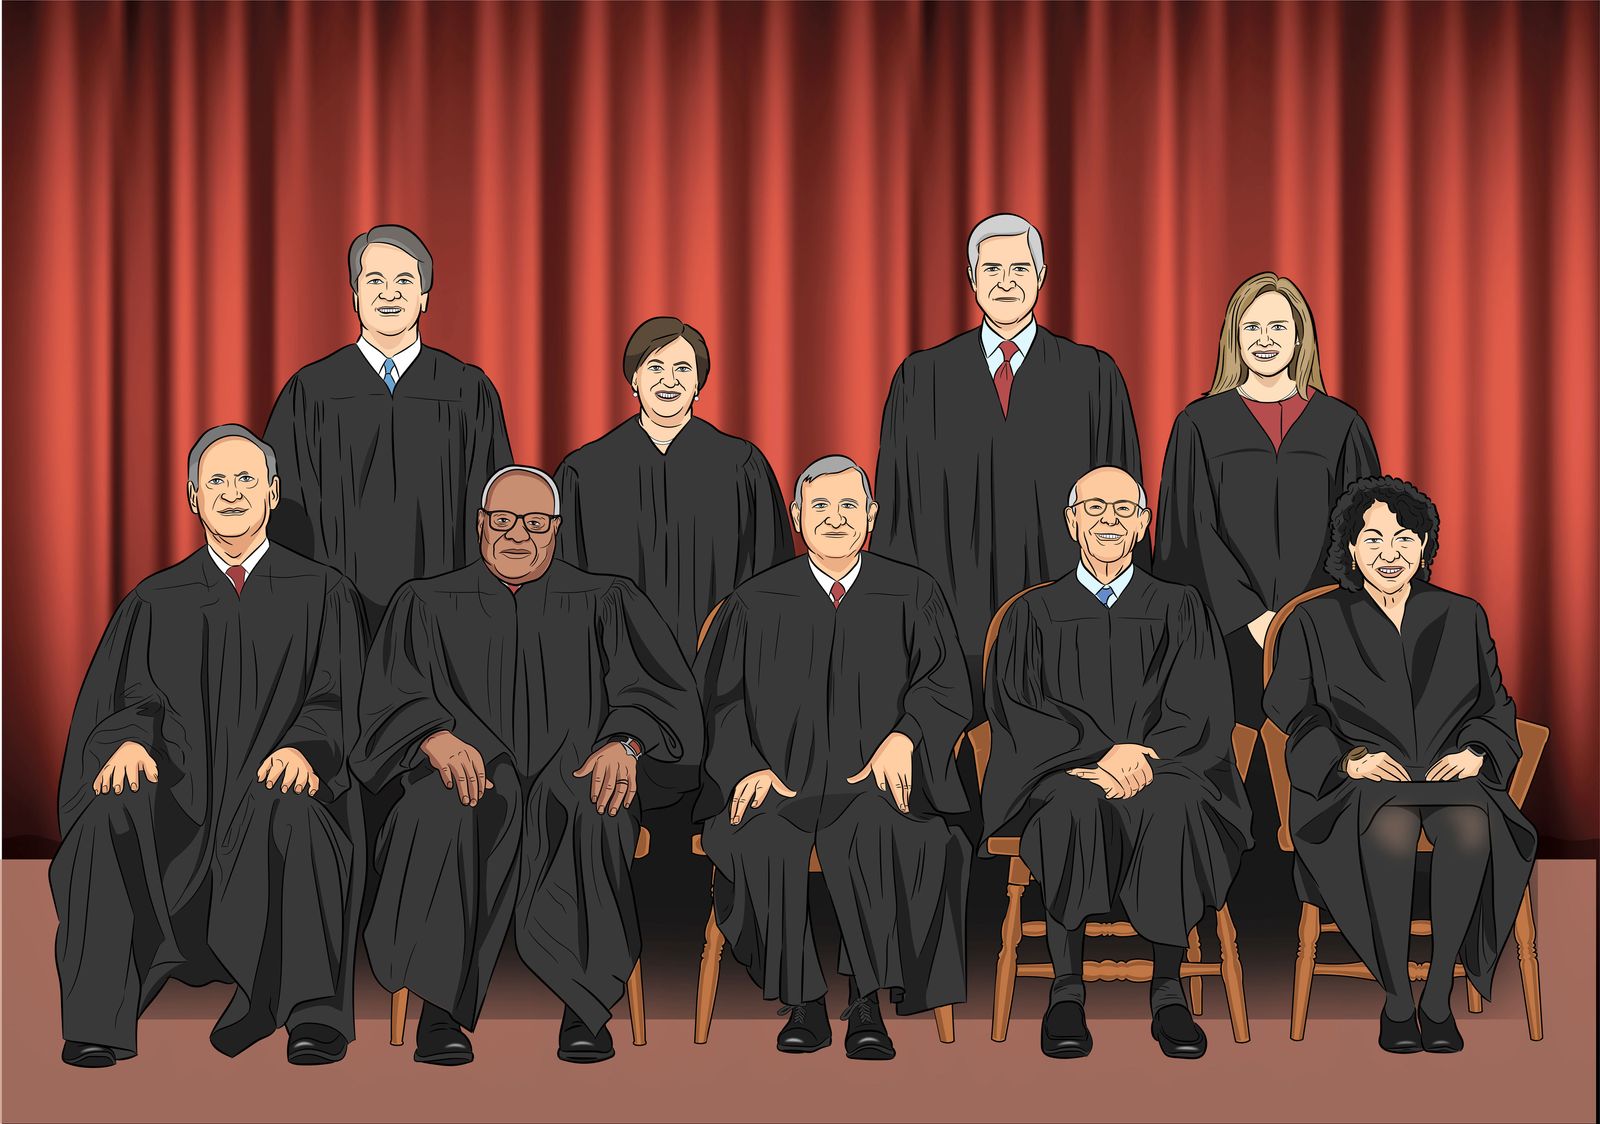 SCOTUS Overturns Roe V. Wade; Endorses Carrying Guns in Public, 50 Years of Watergate, The Bear is Back, January 6th Committee Hearings, The 411 on 988, Biden Signs Bi-Partisan Gun Bill, FDA Junks JUUL, NASA's Webb Uncovers the Early Universe